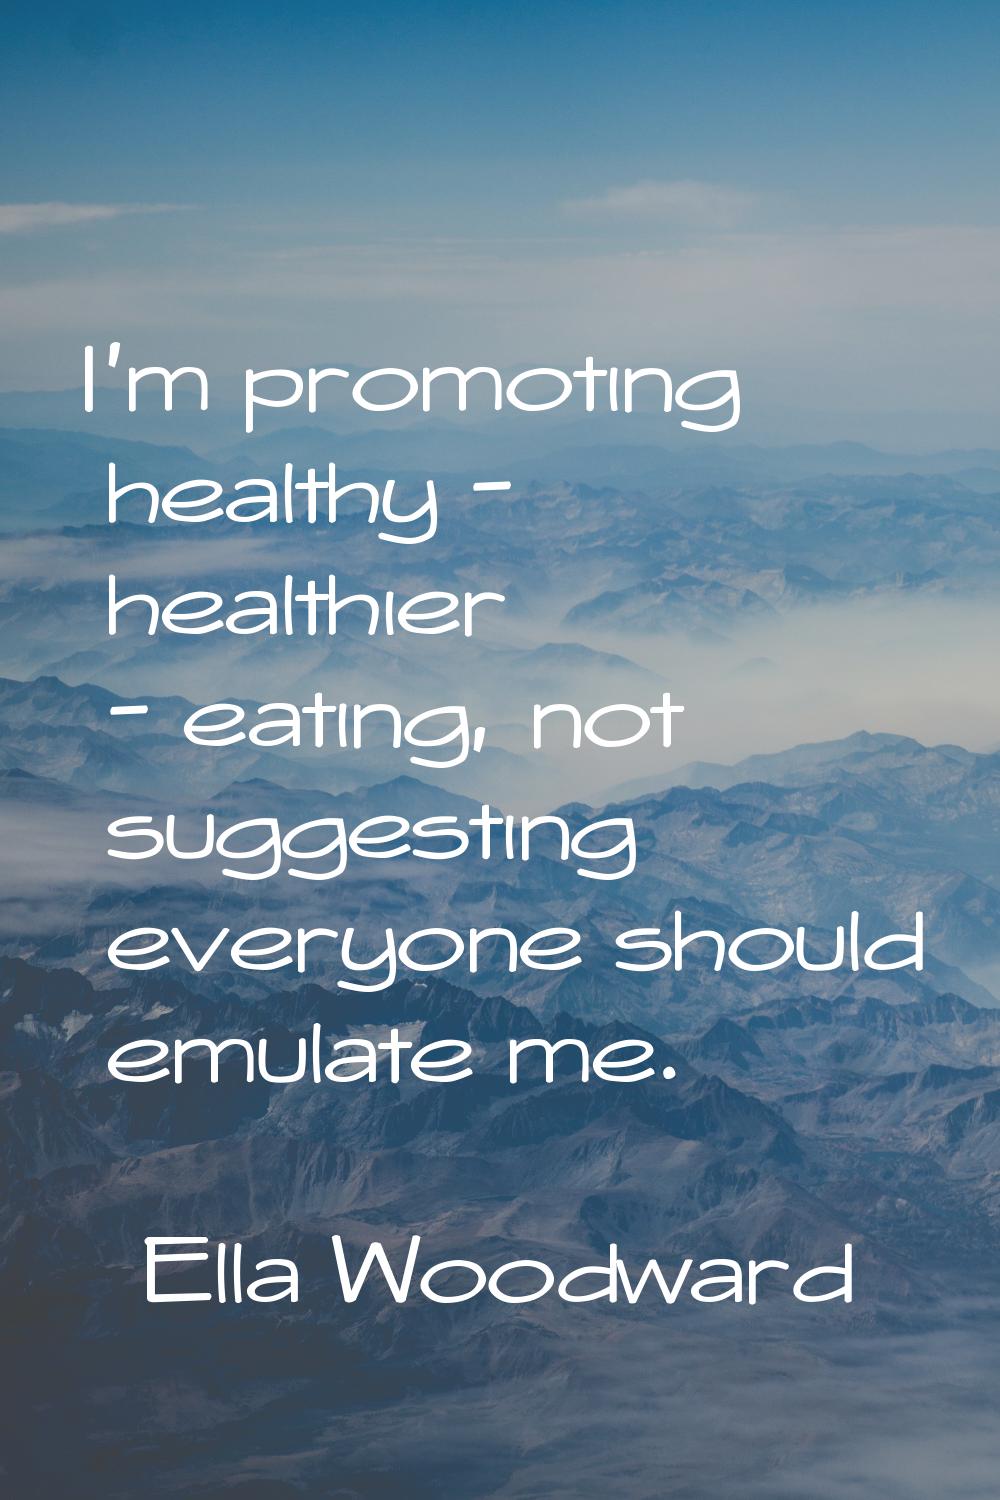 I'm promoting healthy - healthier - eating, not suggesting everyone should emulate me.